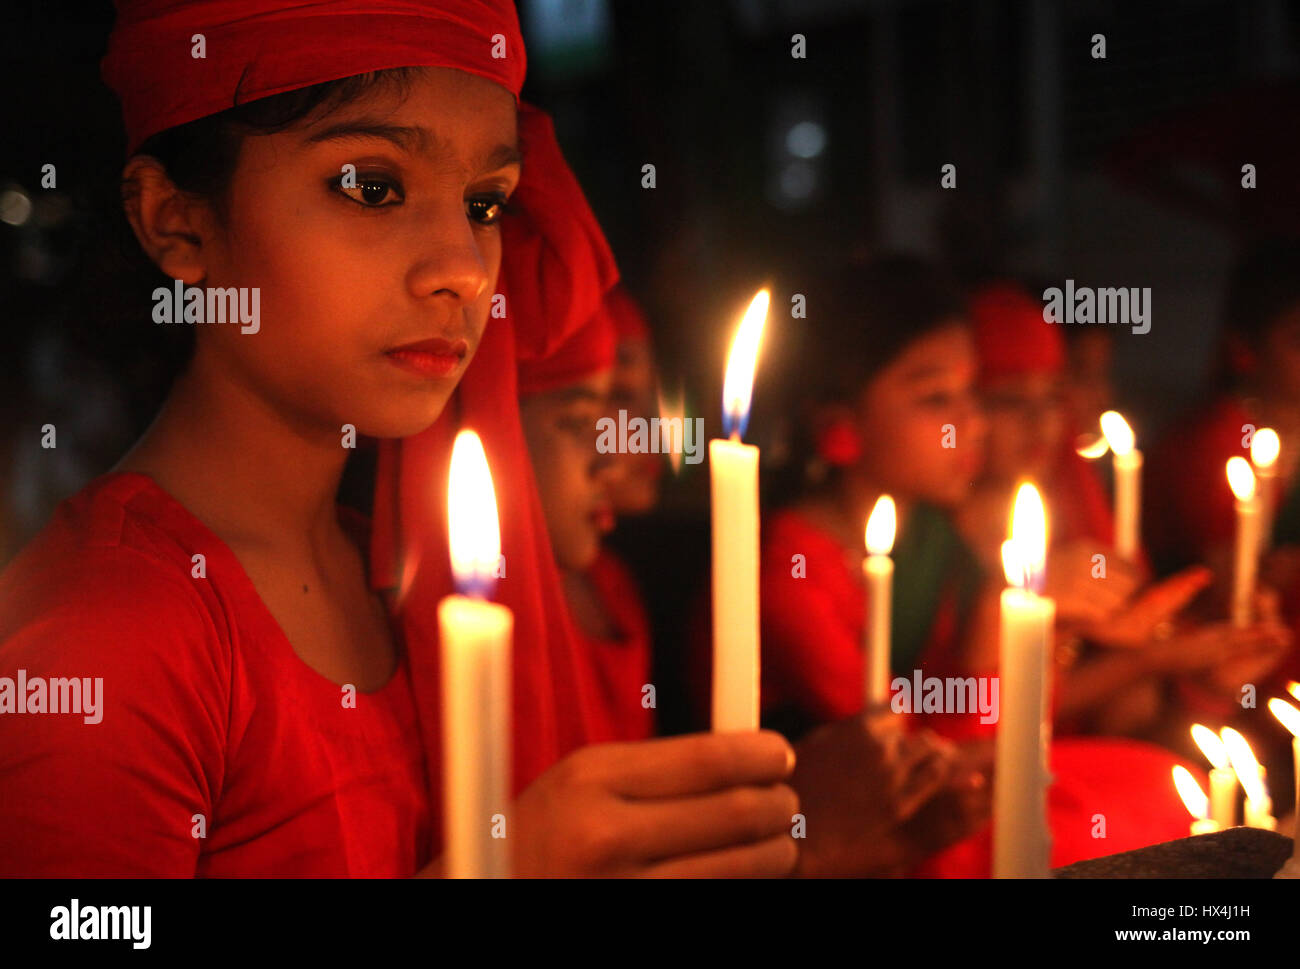 Dhaka, Bangladesh. 25th Mar, 2017. 25 March 2017 Dhaka, Bangladesh - Bangladeshi childranlit candles to remember the victims of ''Operation Searchlight,'' the 1971 military operation carried out by the Pakistan Army to curb the Bengali nationalist movement in the Dhaka City on 25 March 2017. The black night of March 25, 1971 when the Pakistani occupation forces kicked off one of the worst genocides in history that led to a nine-month war for the independence of Bangladesh in 1971. Credit: ZUMA Press, Inc./Alamy Live News Stock Photo